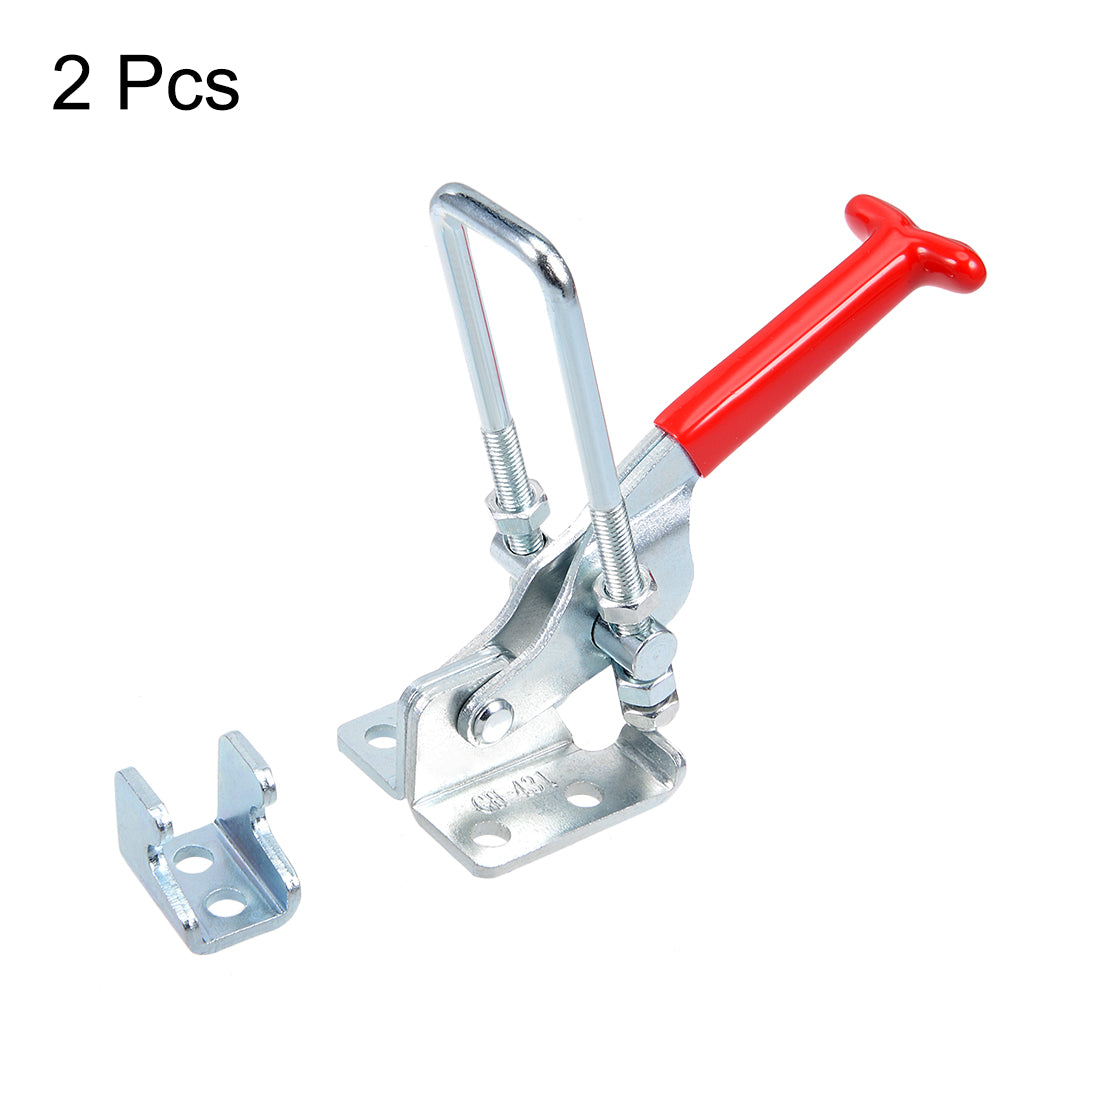 uxcell Uxcell Toggle Latch Clamp 320Kg 704lbs Capacity Pull Action Adjustable Latch GH-431 2pcs